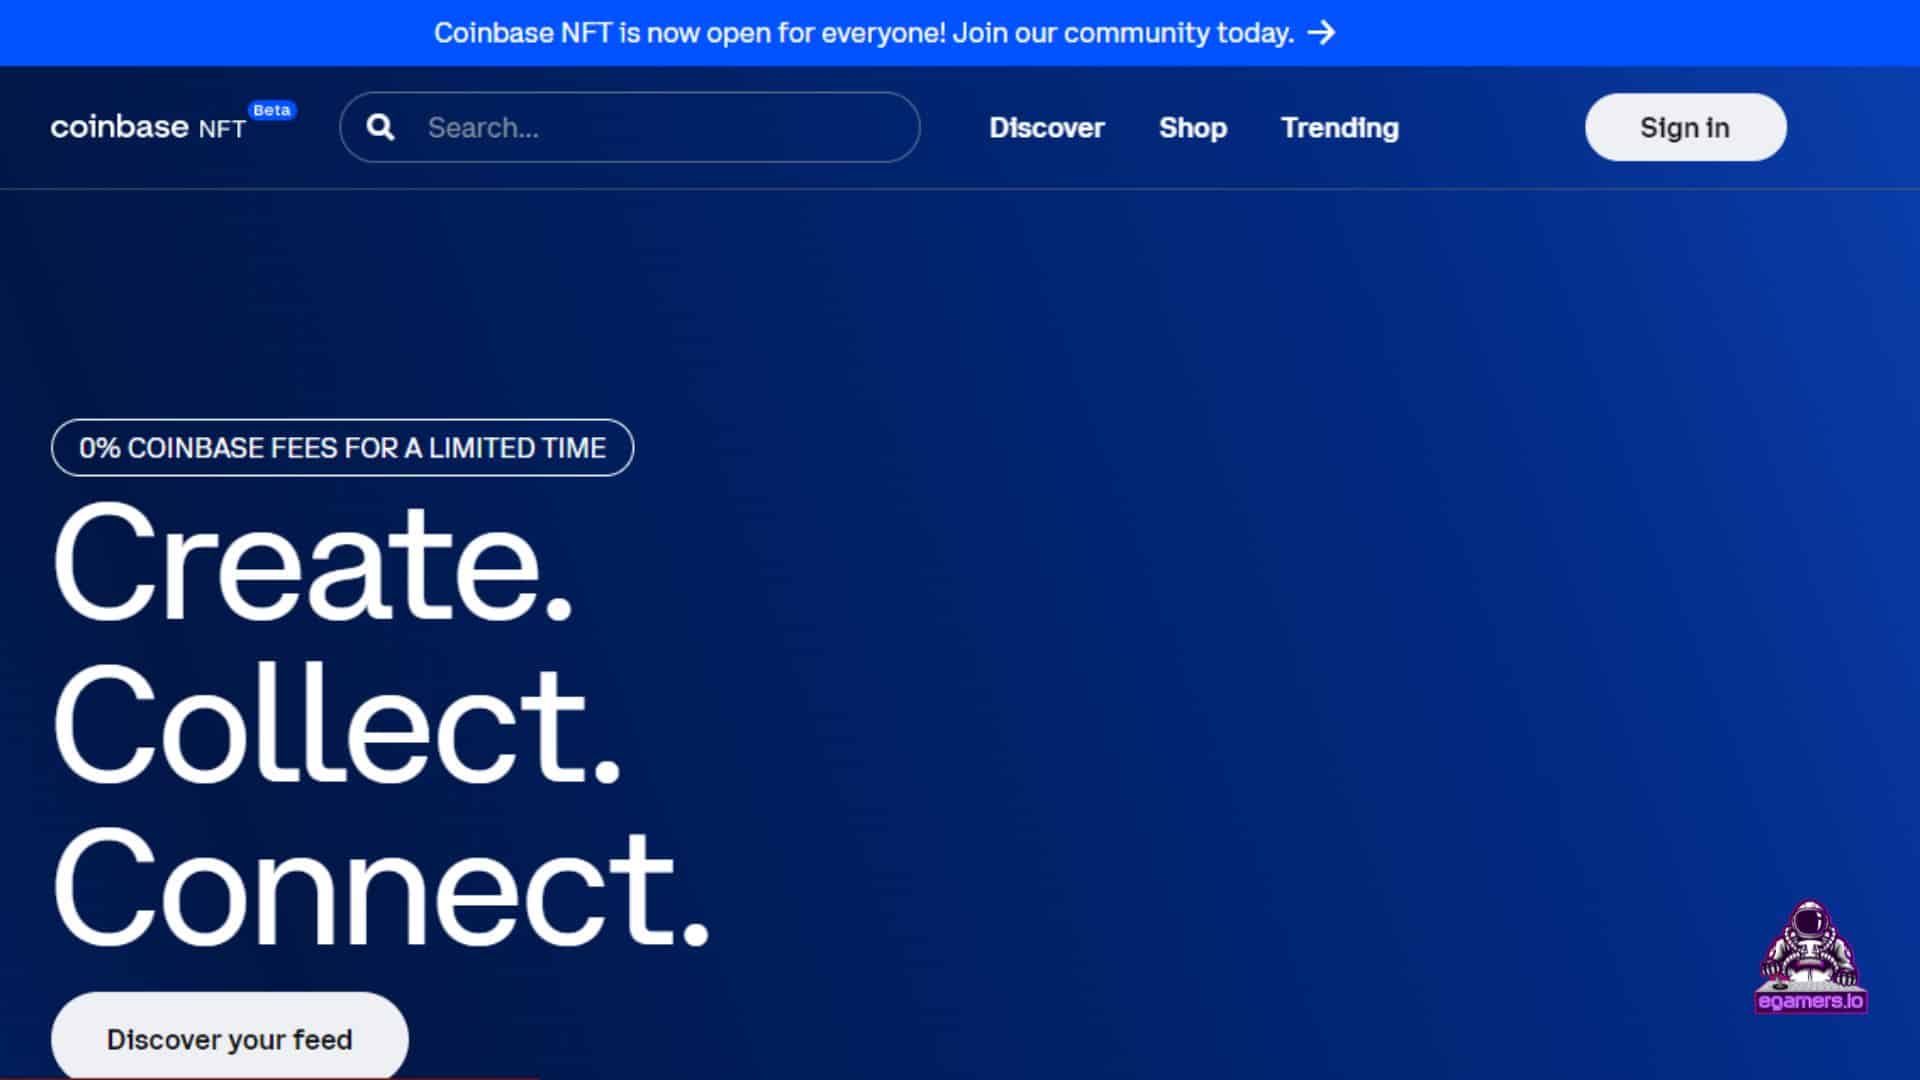 After testing the beta version with a private group of users, Coinbase is finally opening the NFT marketplace (Still Beta) for the public. Last month (in April), the NFT marketplace was unveiled to a small group of users for testing.